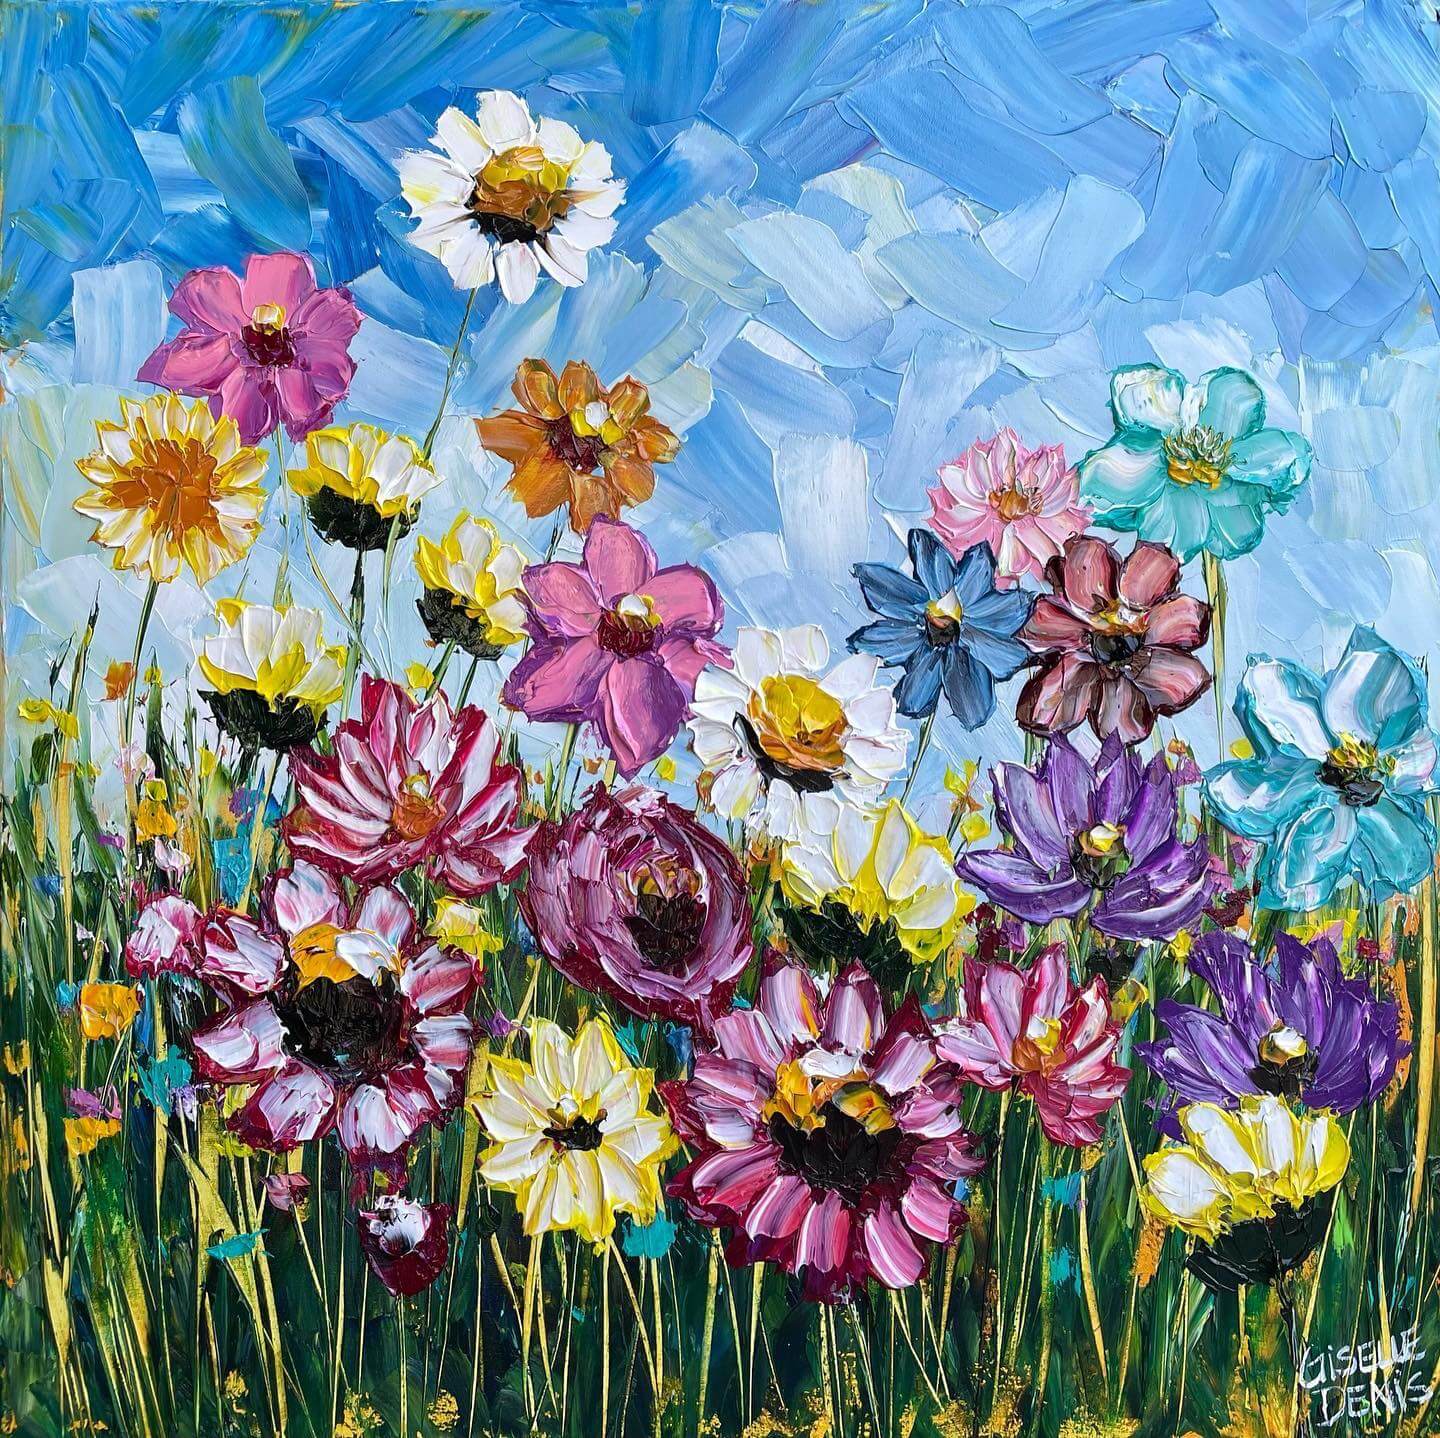 Painting of many wild colorful flowers by Giselle Denis.